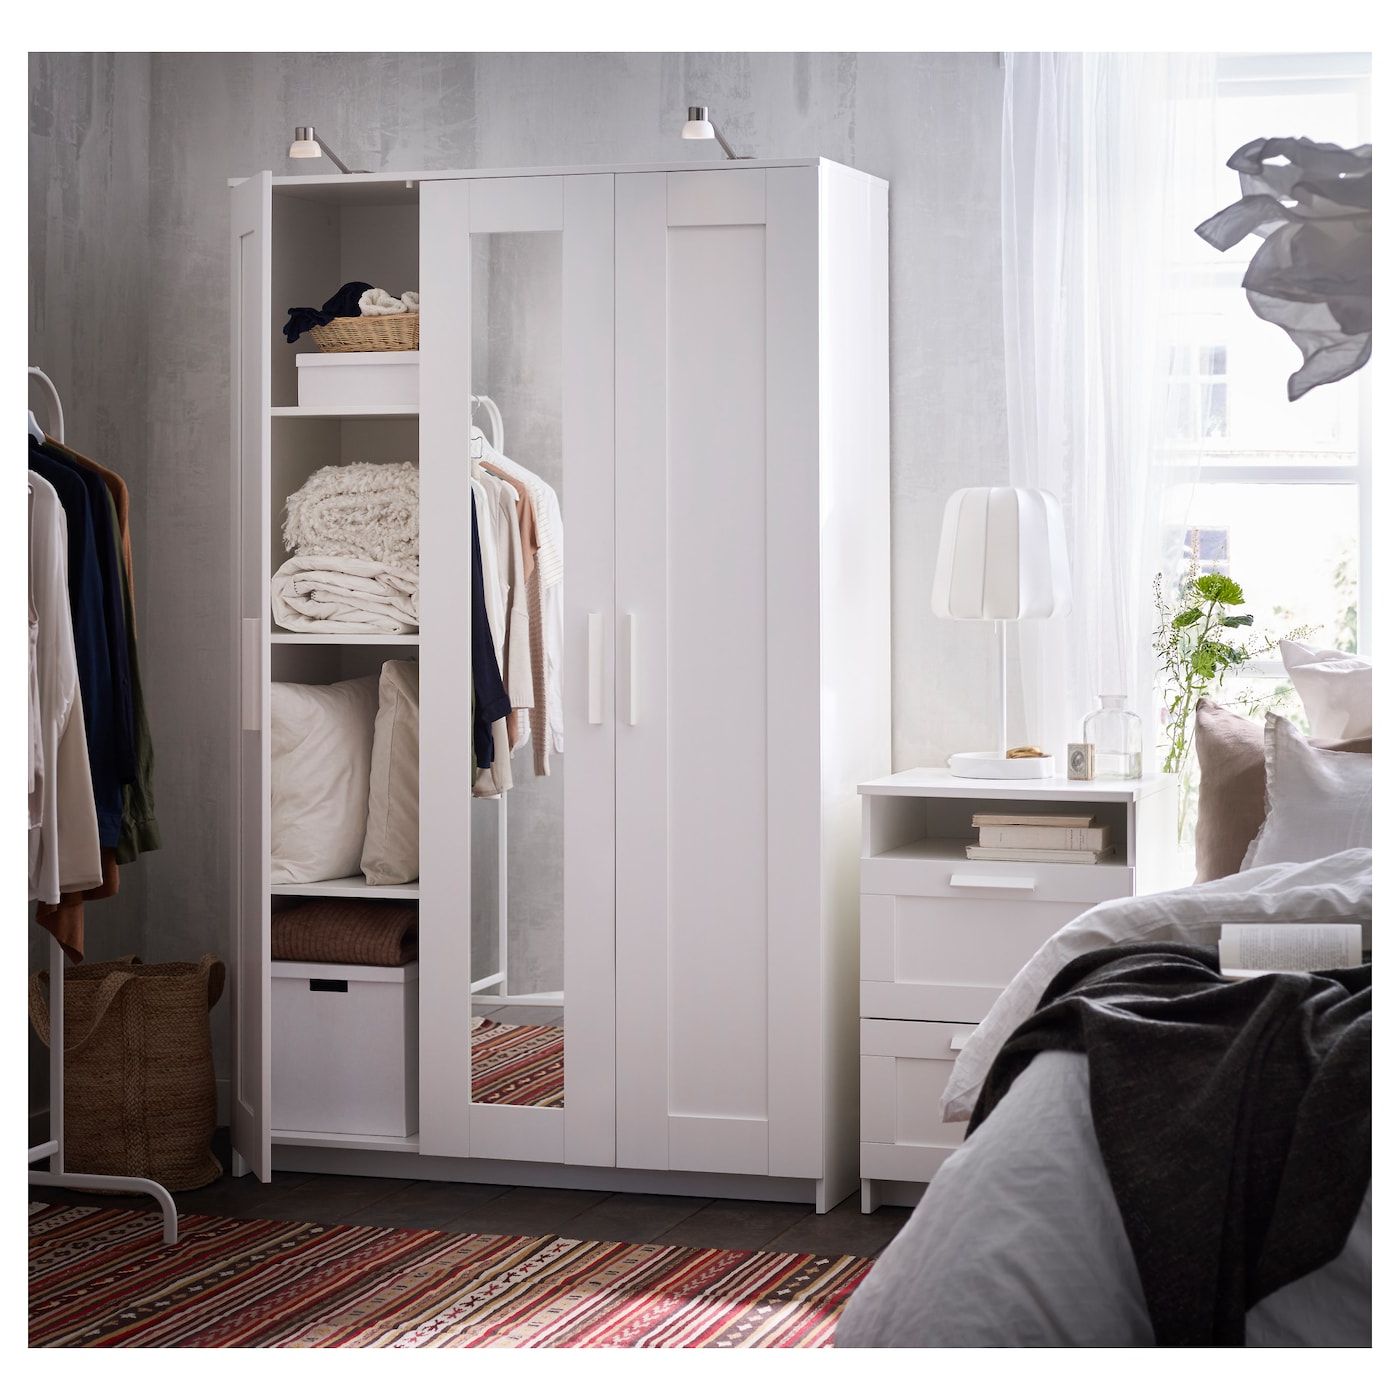 Brimnes White, Wardrobe With 3 Doors, 117x190 Cm – Ikea For White 3 Door Wardrobes With Drawers (View 8 of 20)